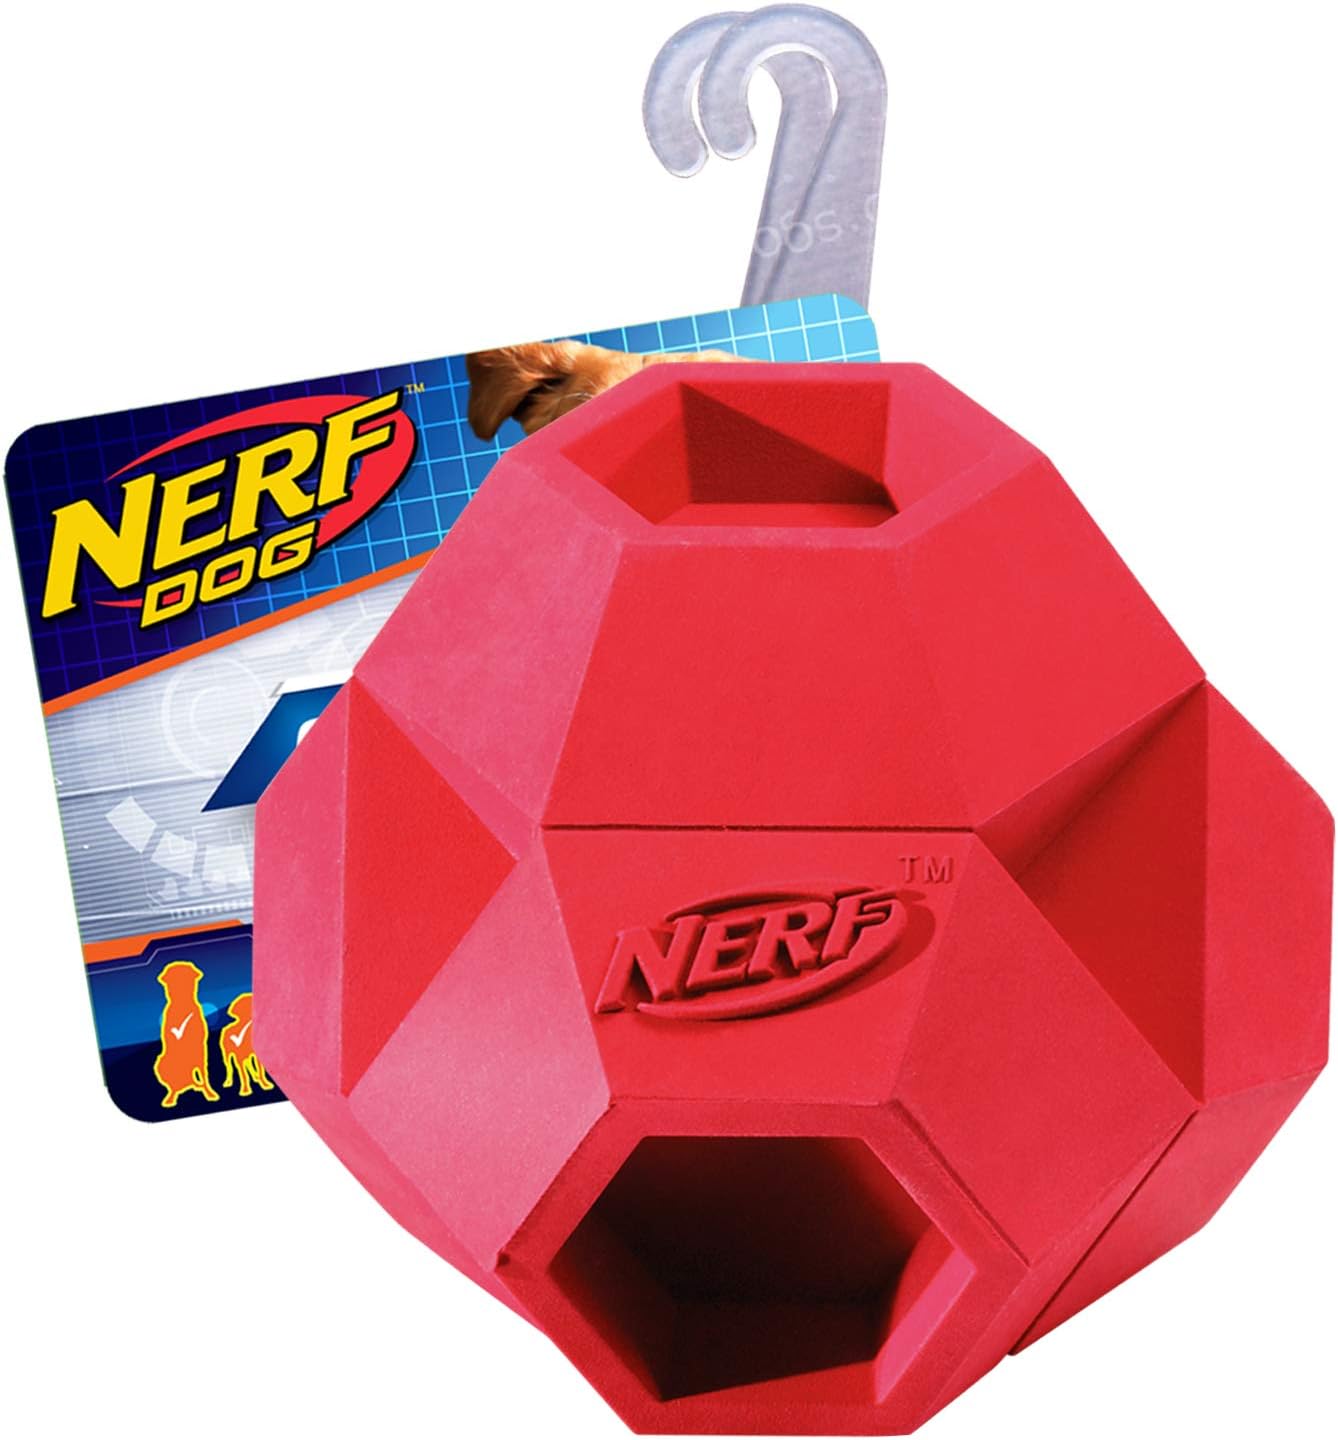 This ball is a little on the heavier side. Which makes it bounce and 